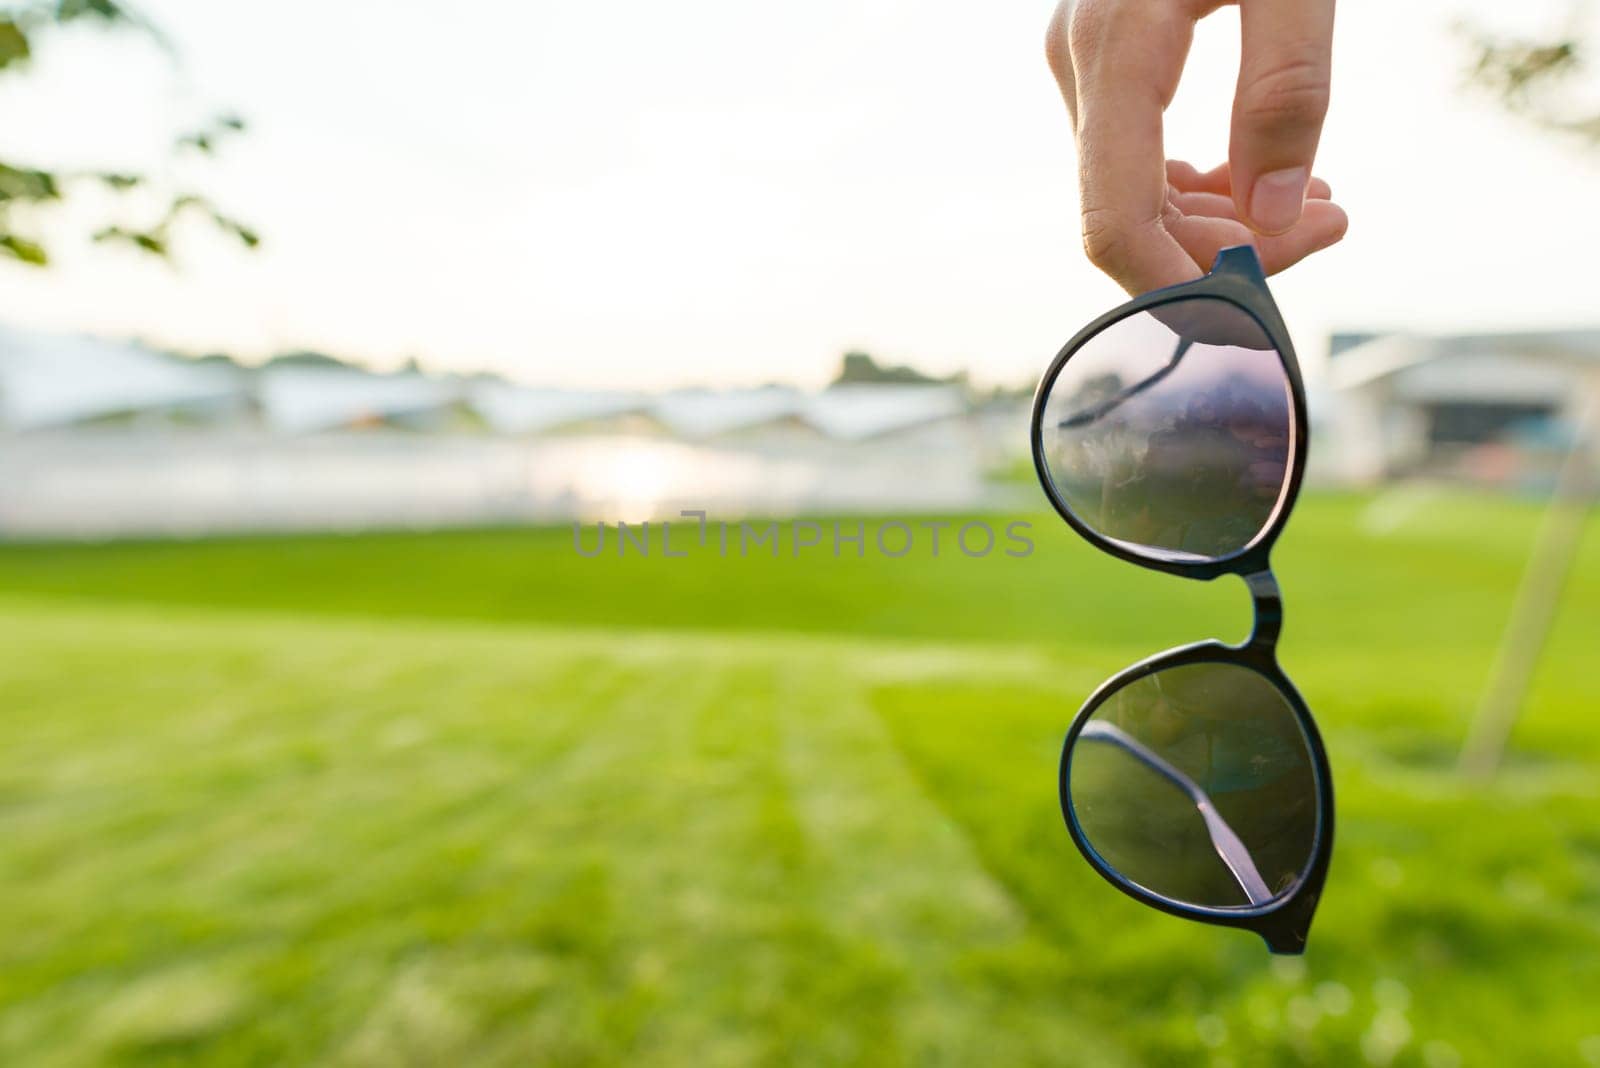 Sunglasses in woman hand close up, copy space, summer green grass background, sunset sky